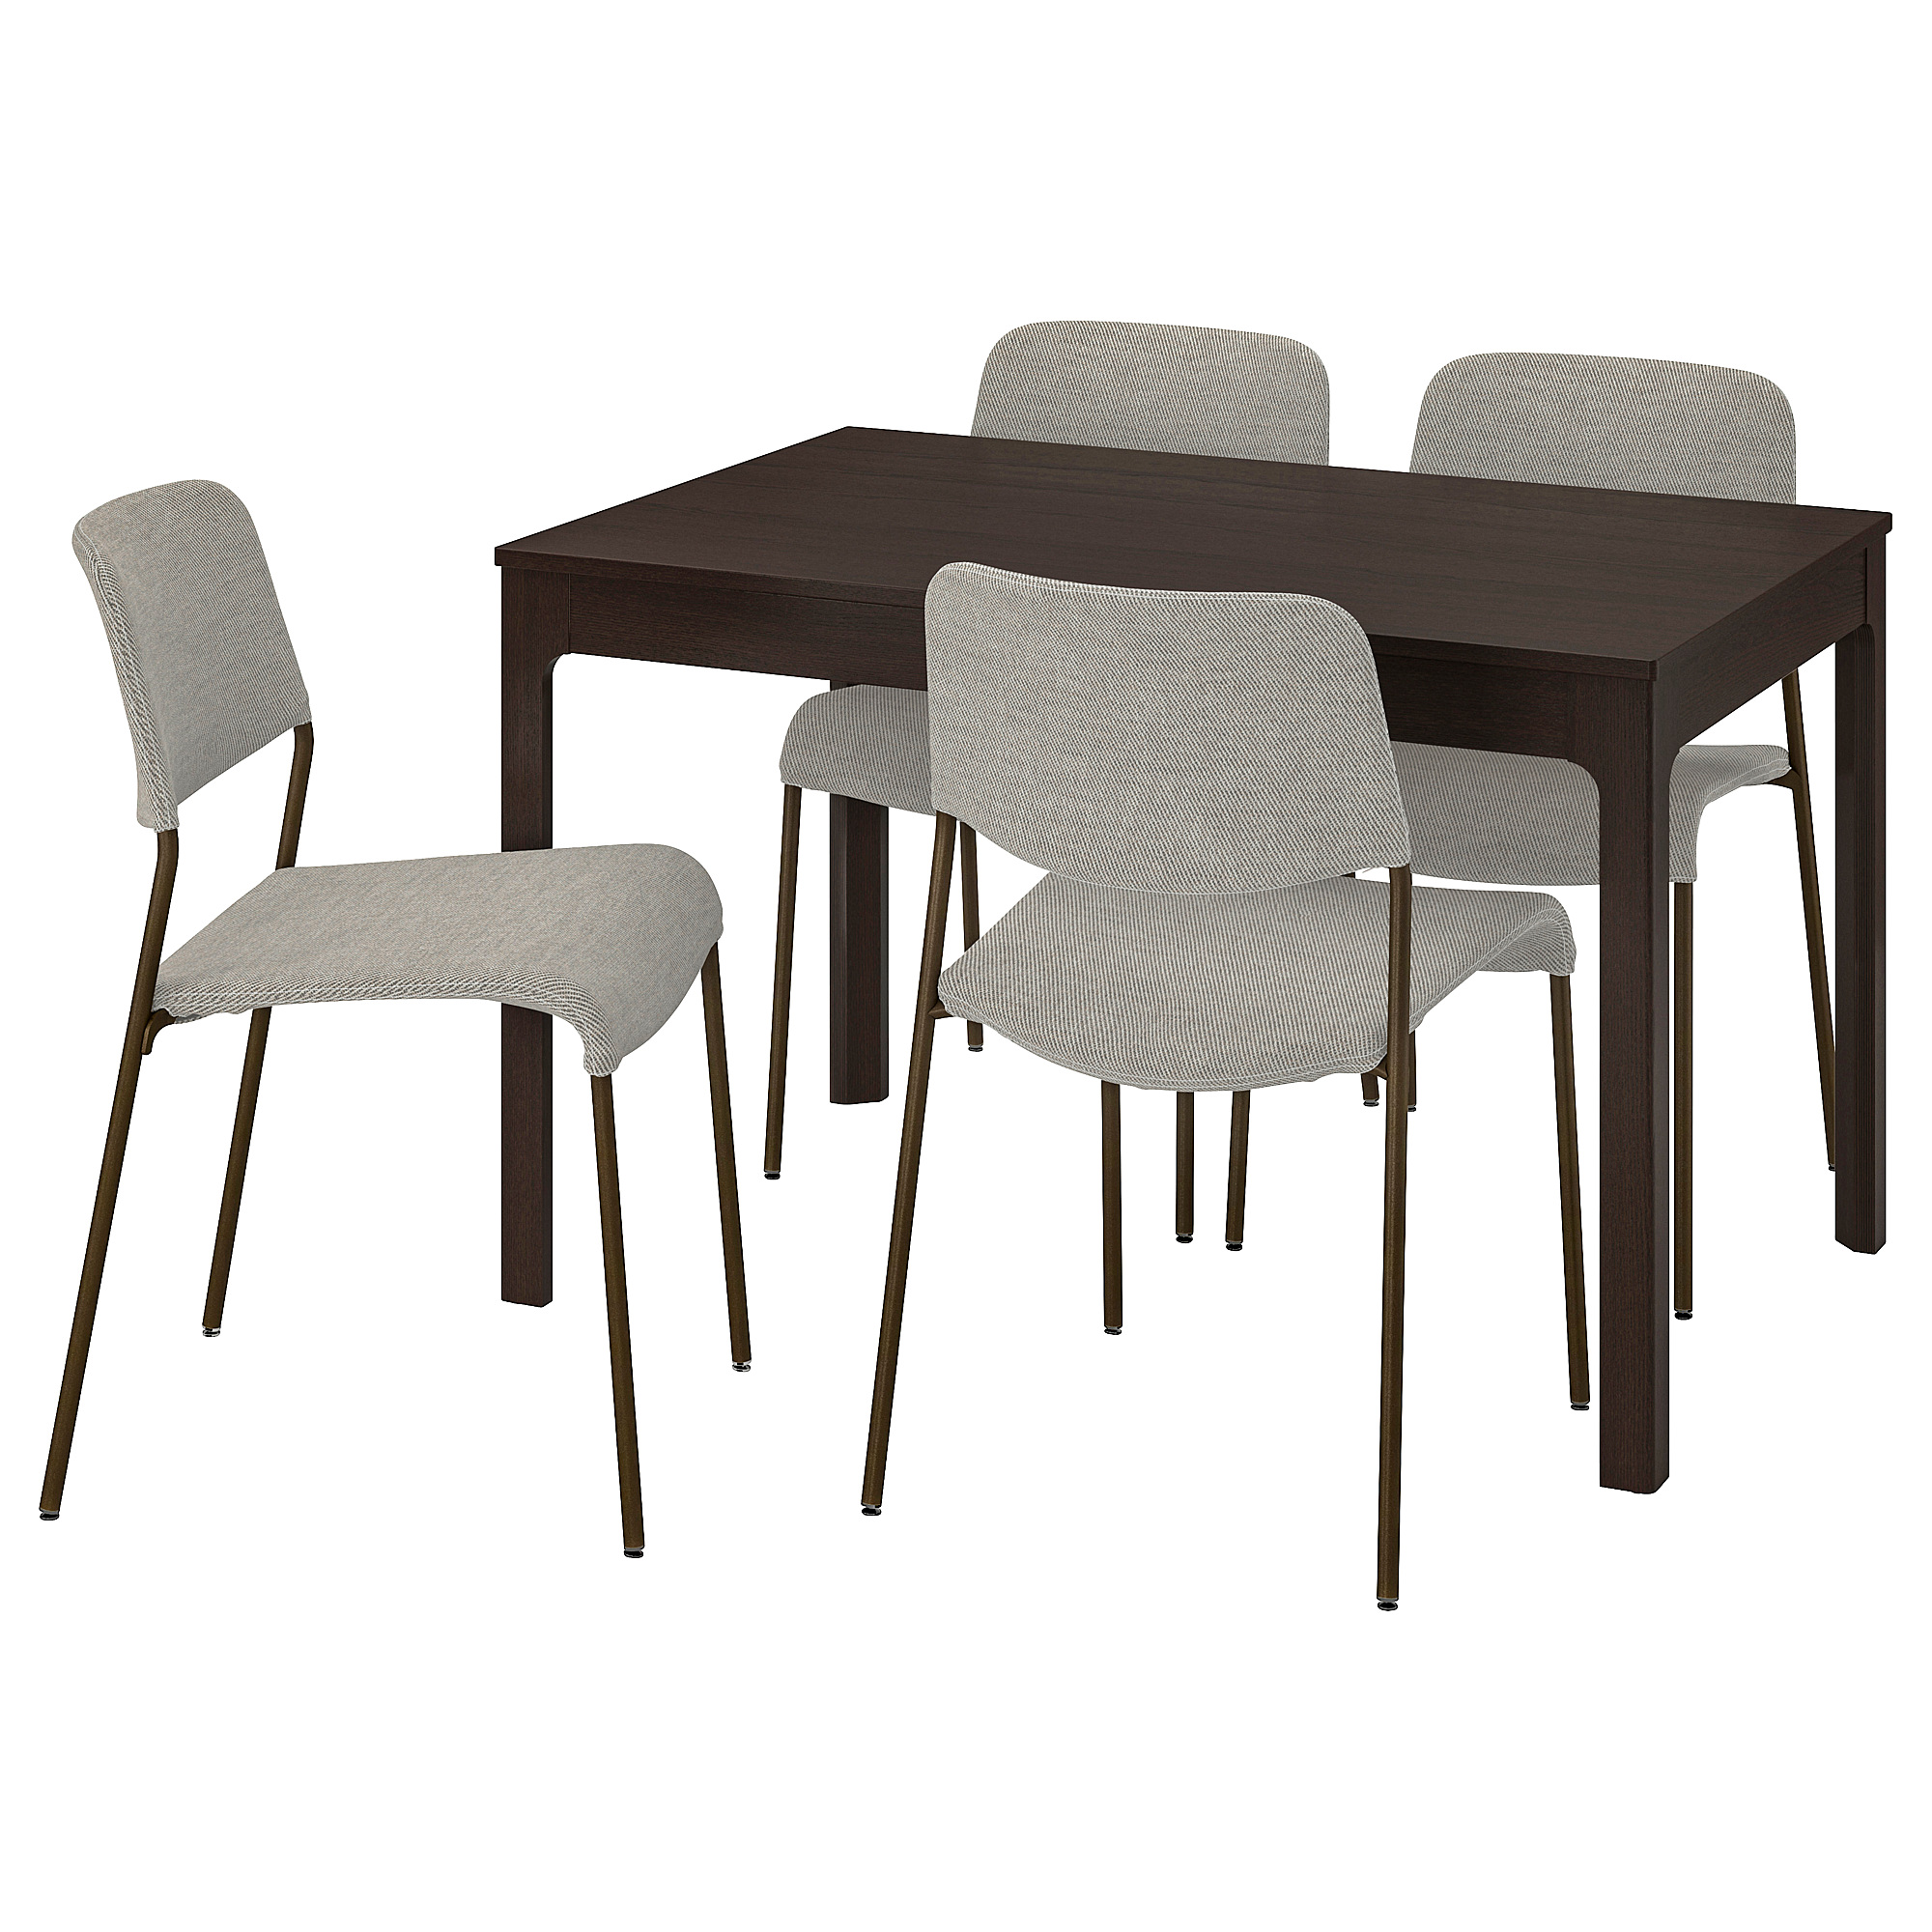 EKEDALEN/UDMUND table and 4 chairs